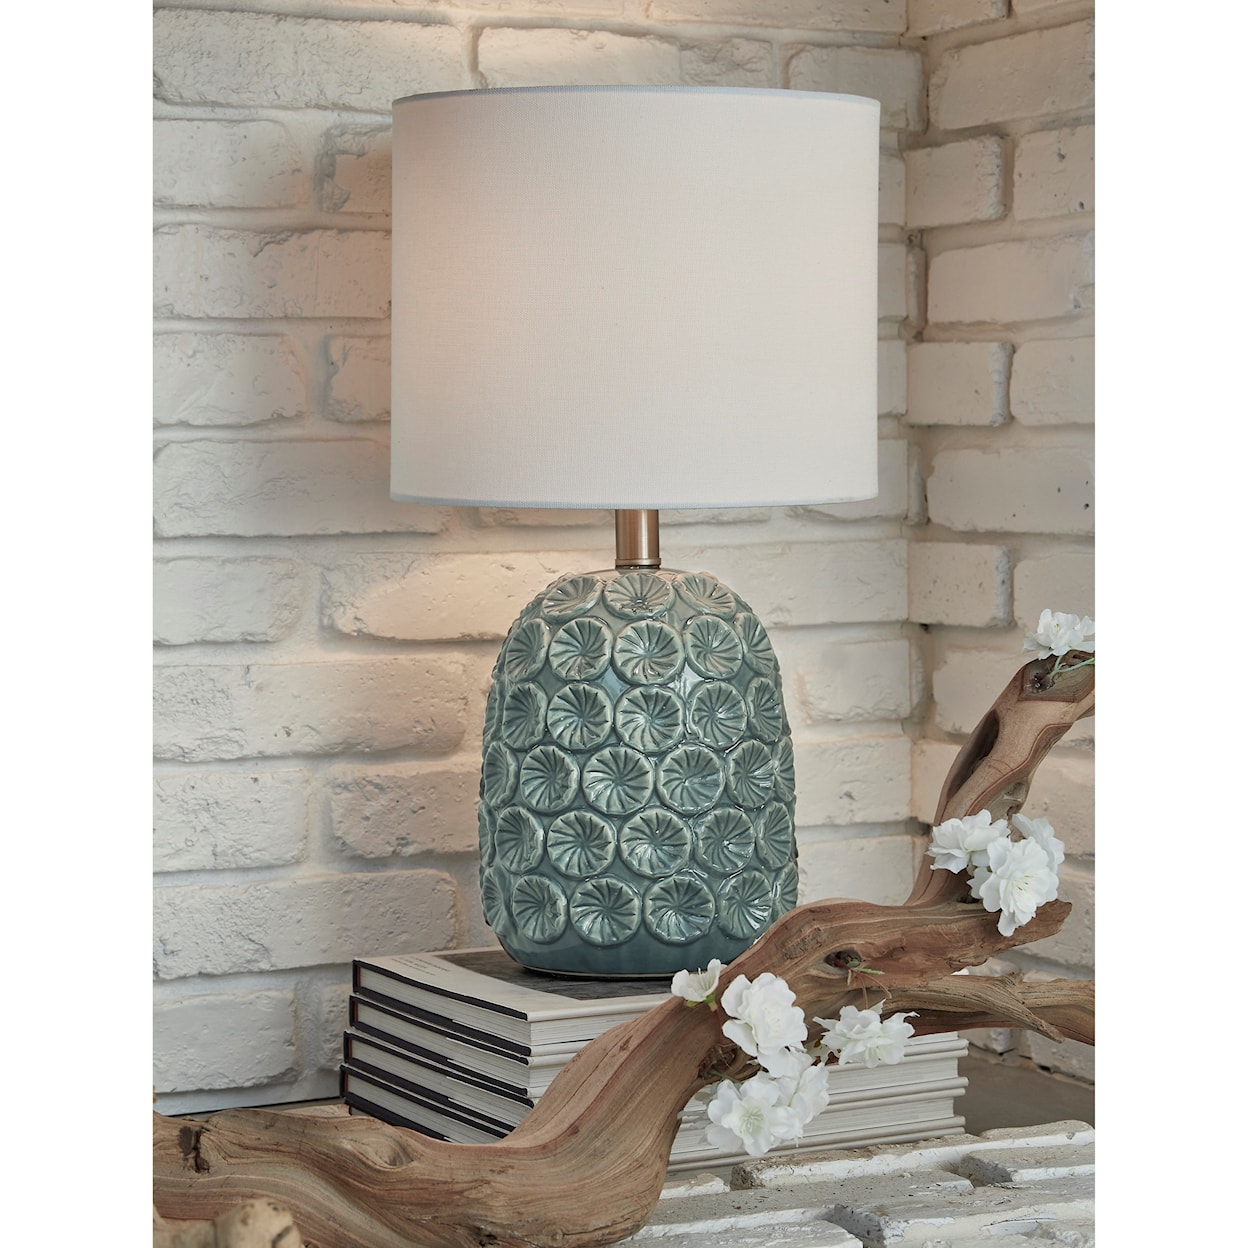 Signature Design by Ashley Lamps - Casual Moorbank Teal Ceramic Table Lamp